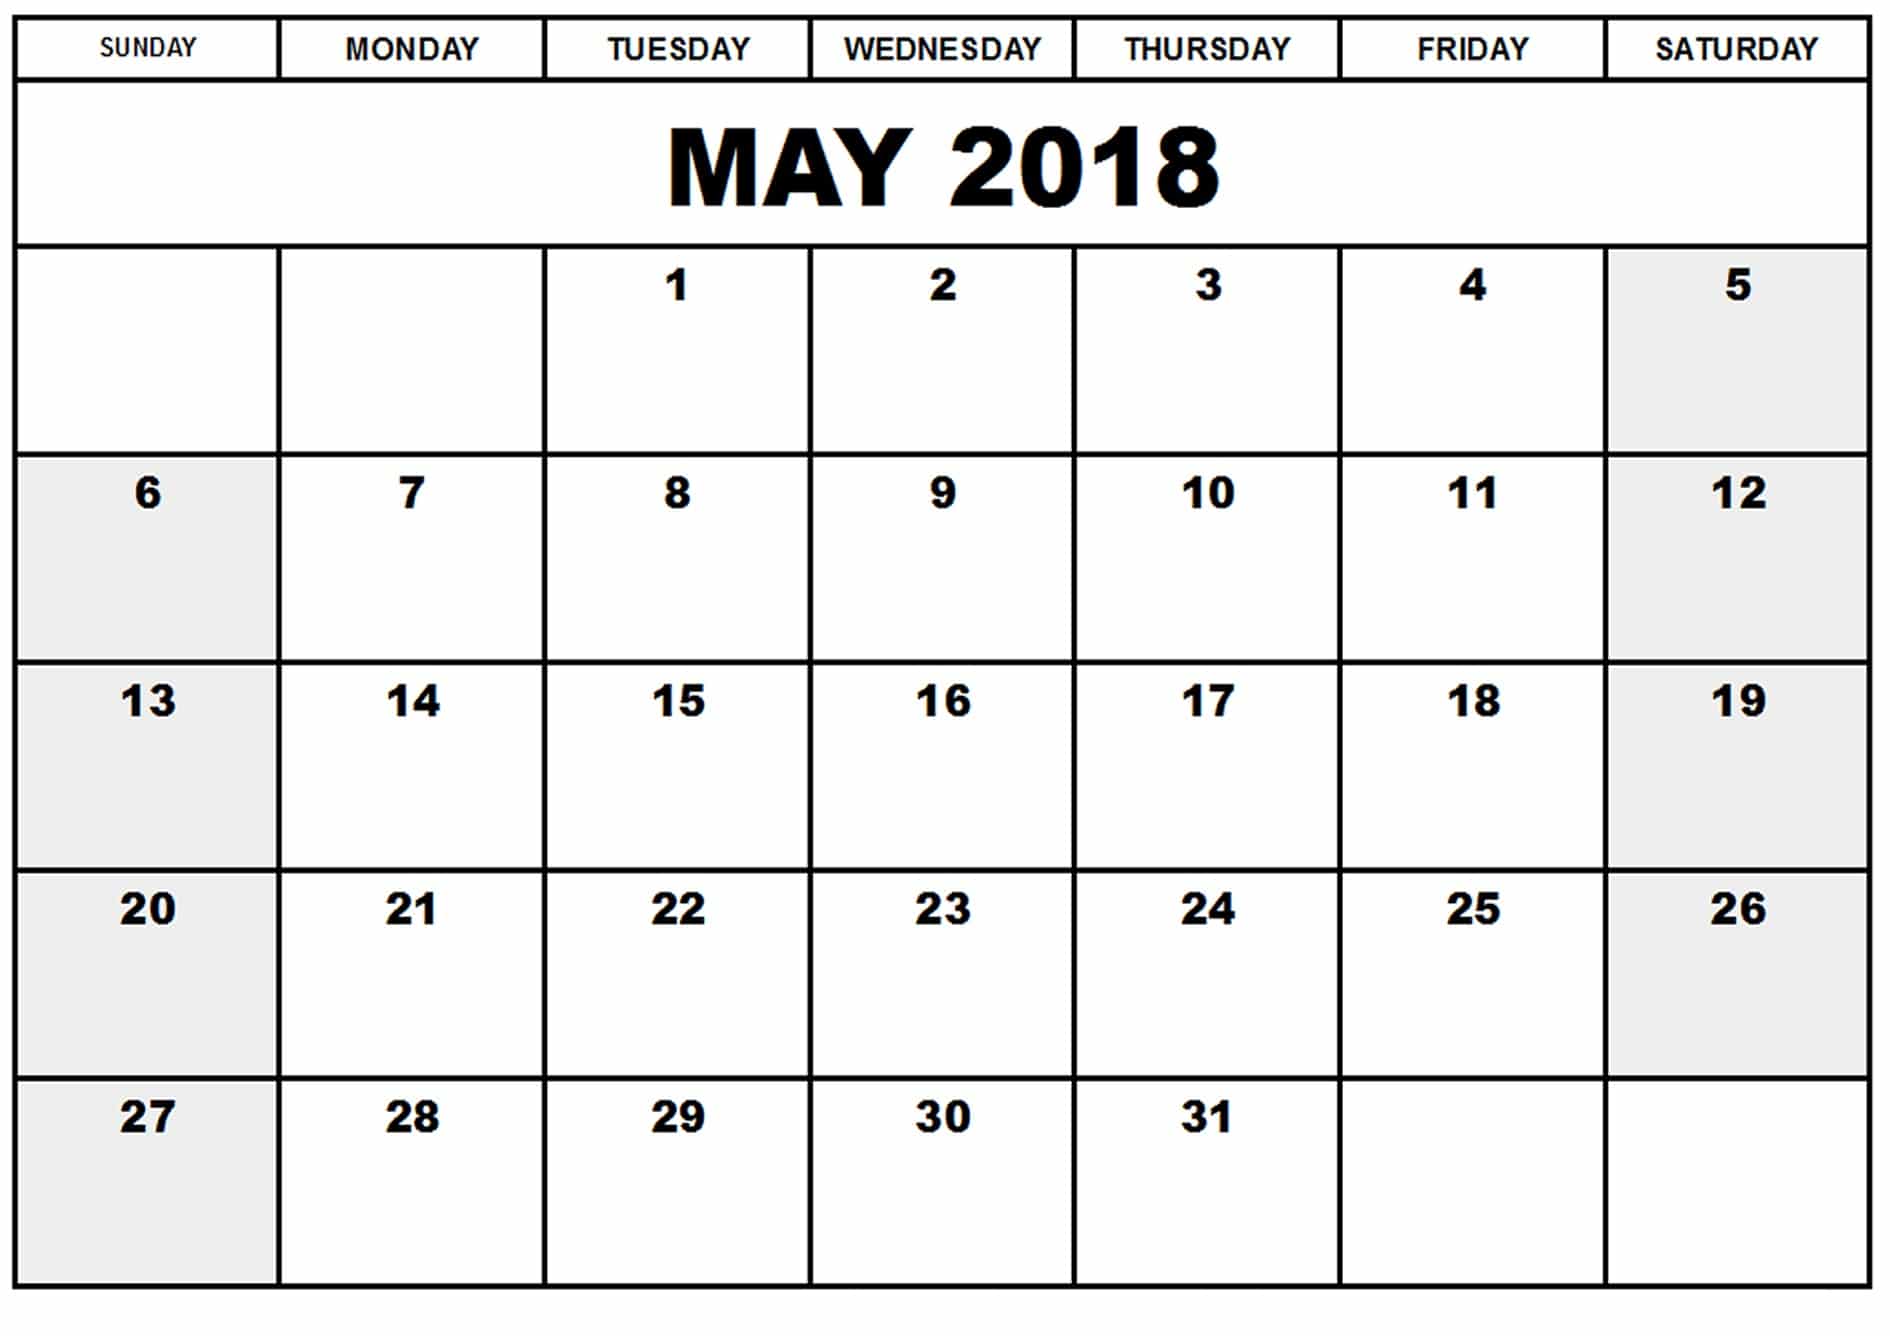 May 2018 Calendar With Holidays May 2018 Calendar With Holidays May 2018 Calendar With Holidays 1 Xqmpan Qgxbwy